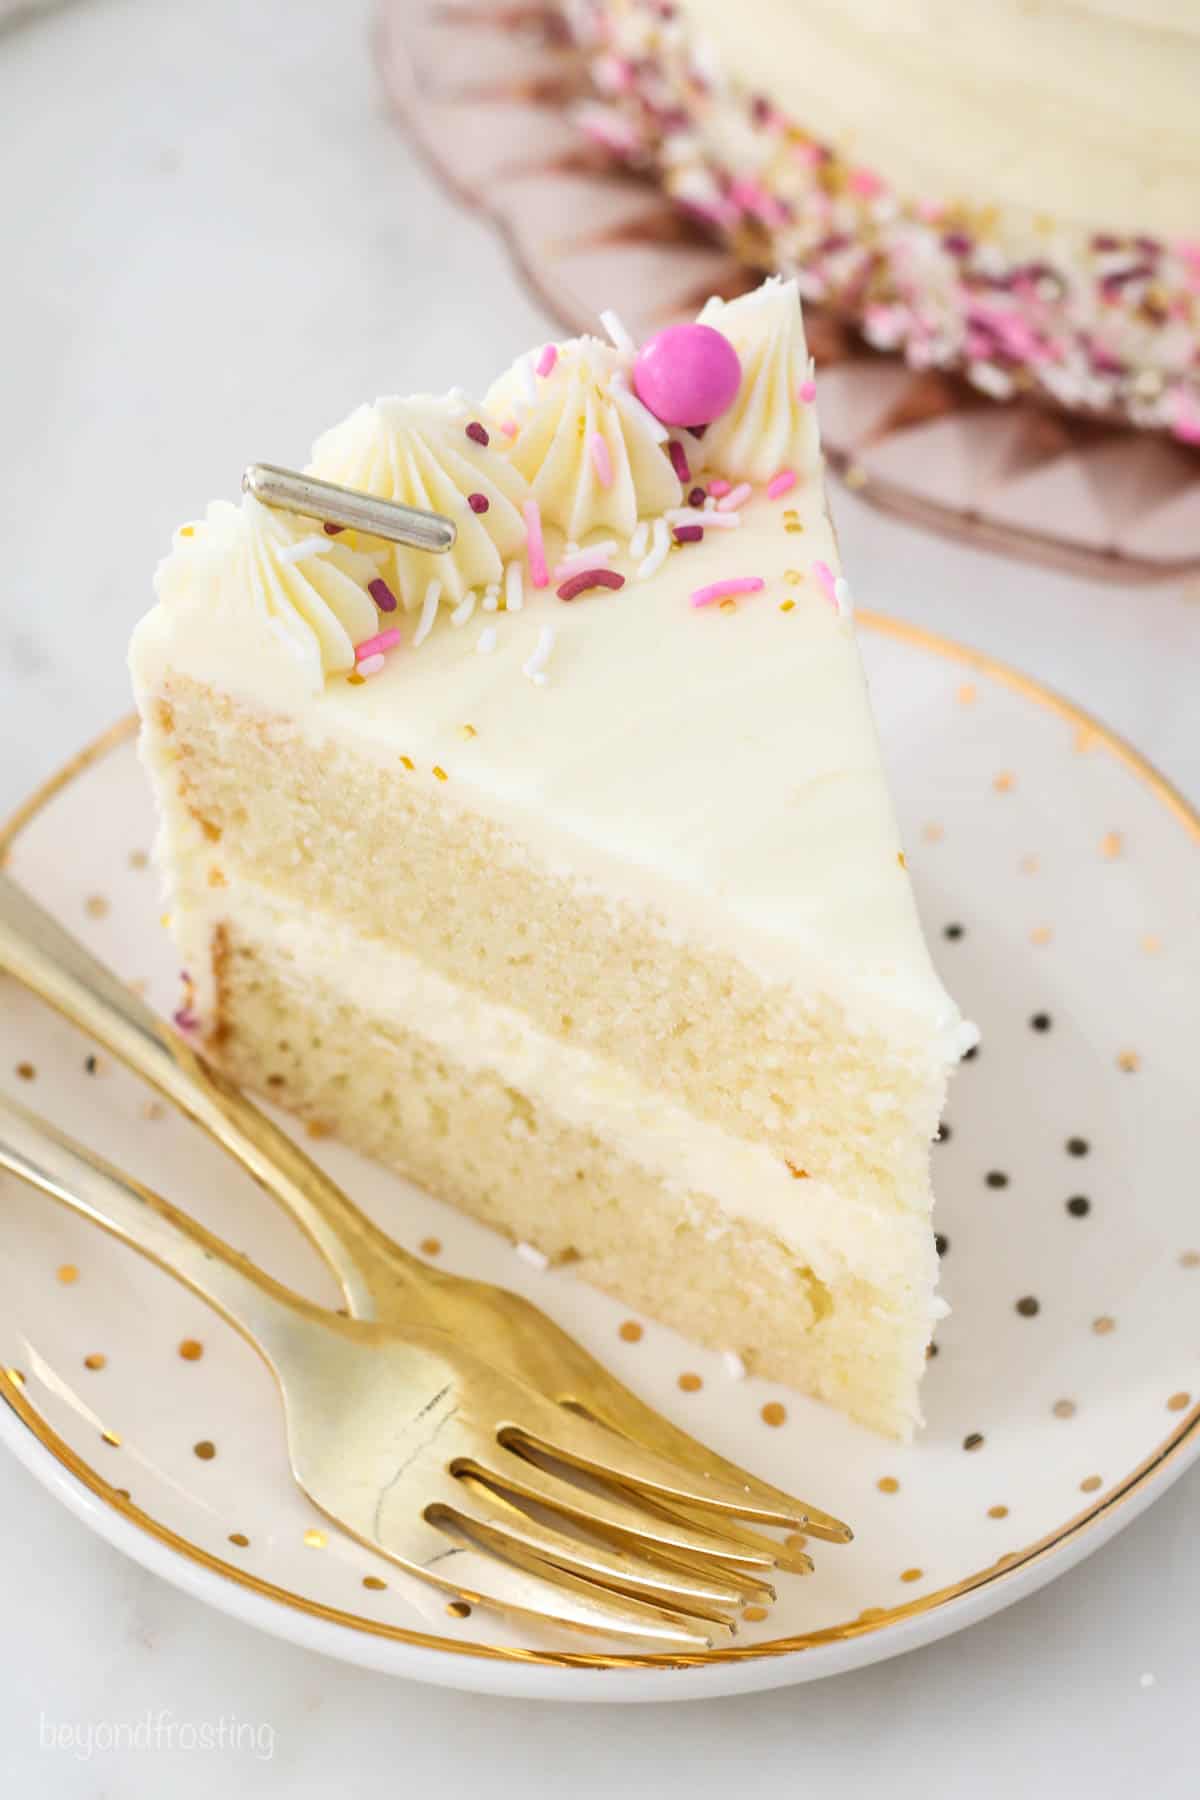 A slice of frosted layer cake decorated with frosting swirls and rainbow sprinkles on a white plate next to a fork.